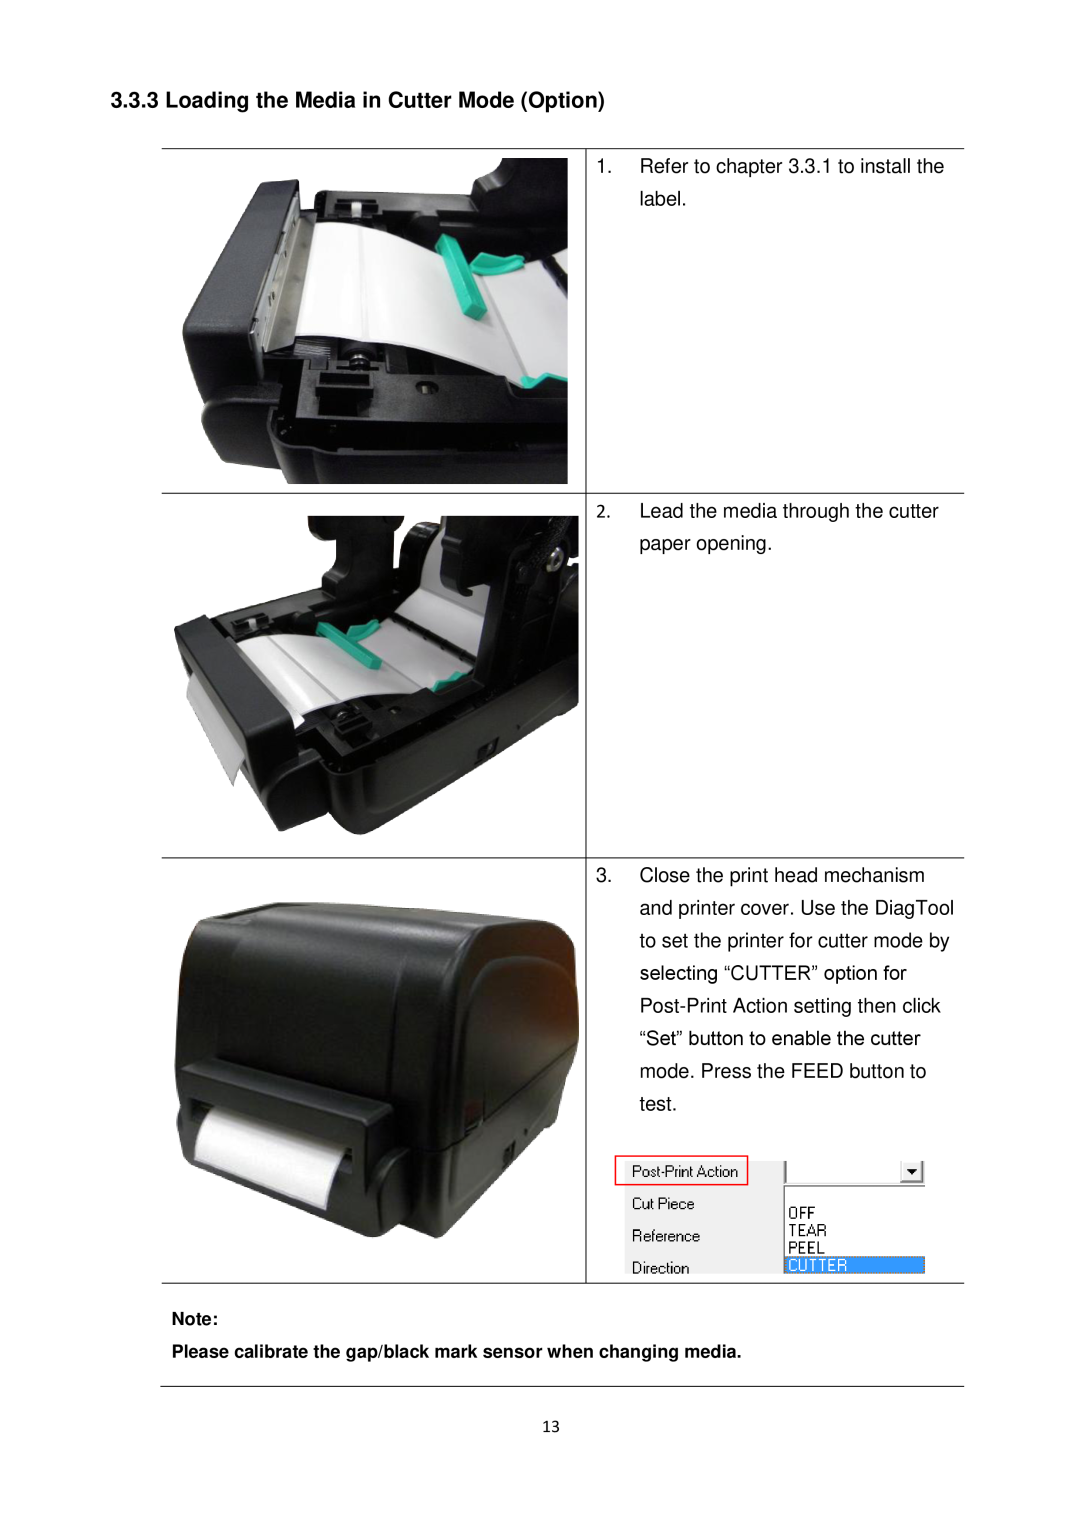 The Speaker Company ta200 manual Loading the Media in Cutter Mode Option 